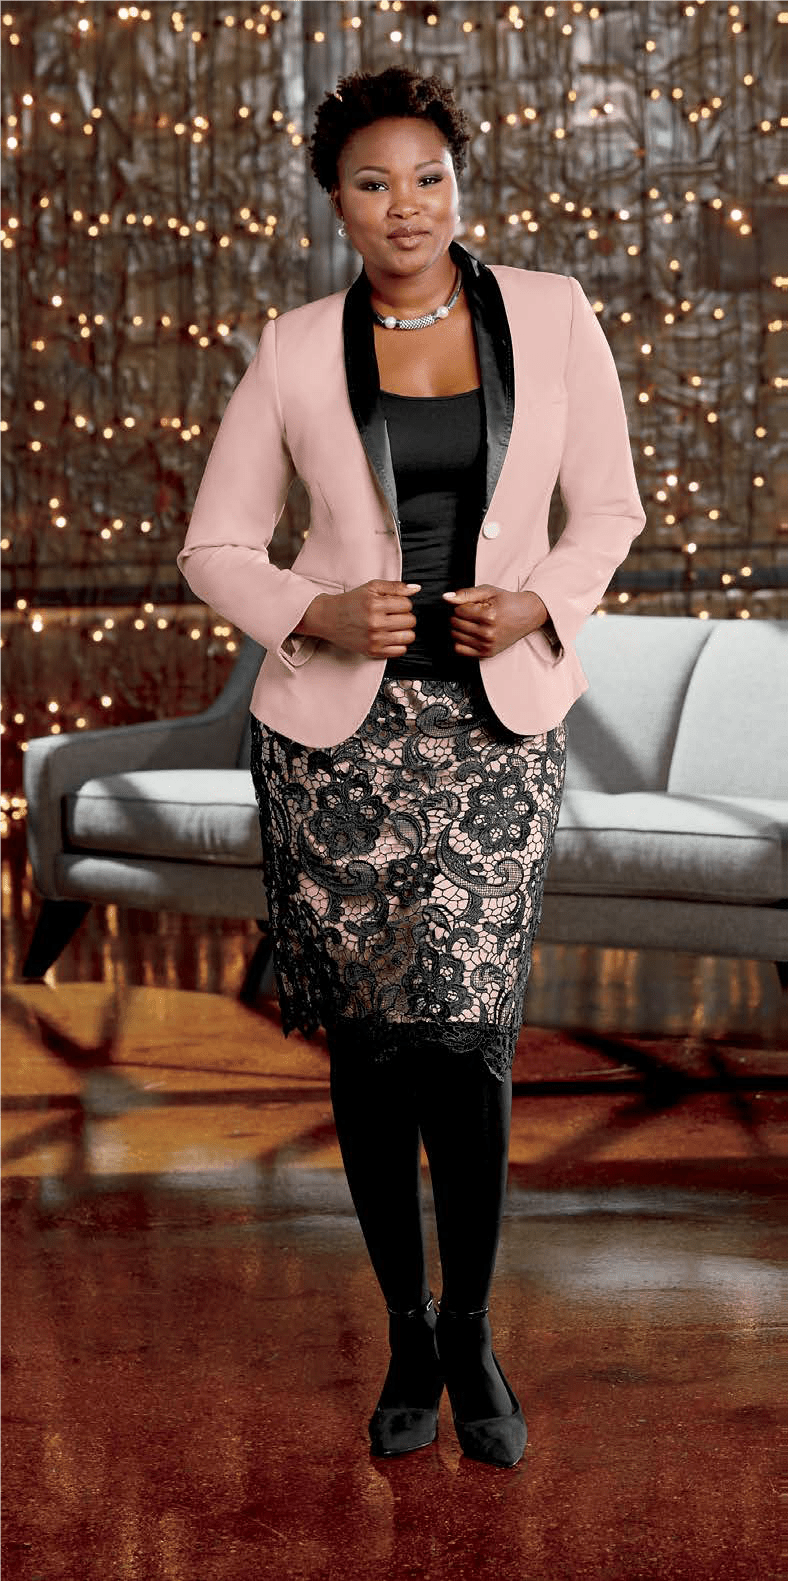 Woman wearing pink jacket and black and pink lace skirt